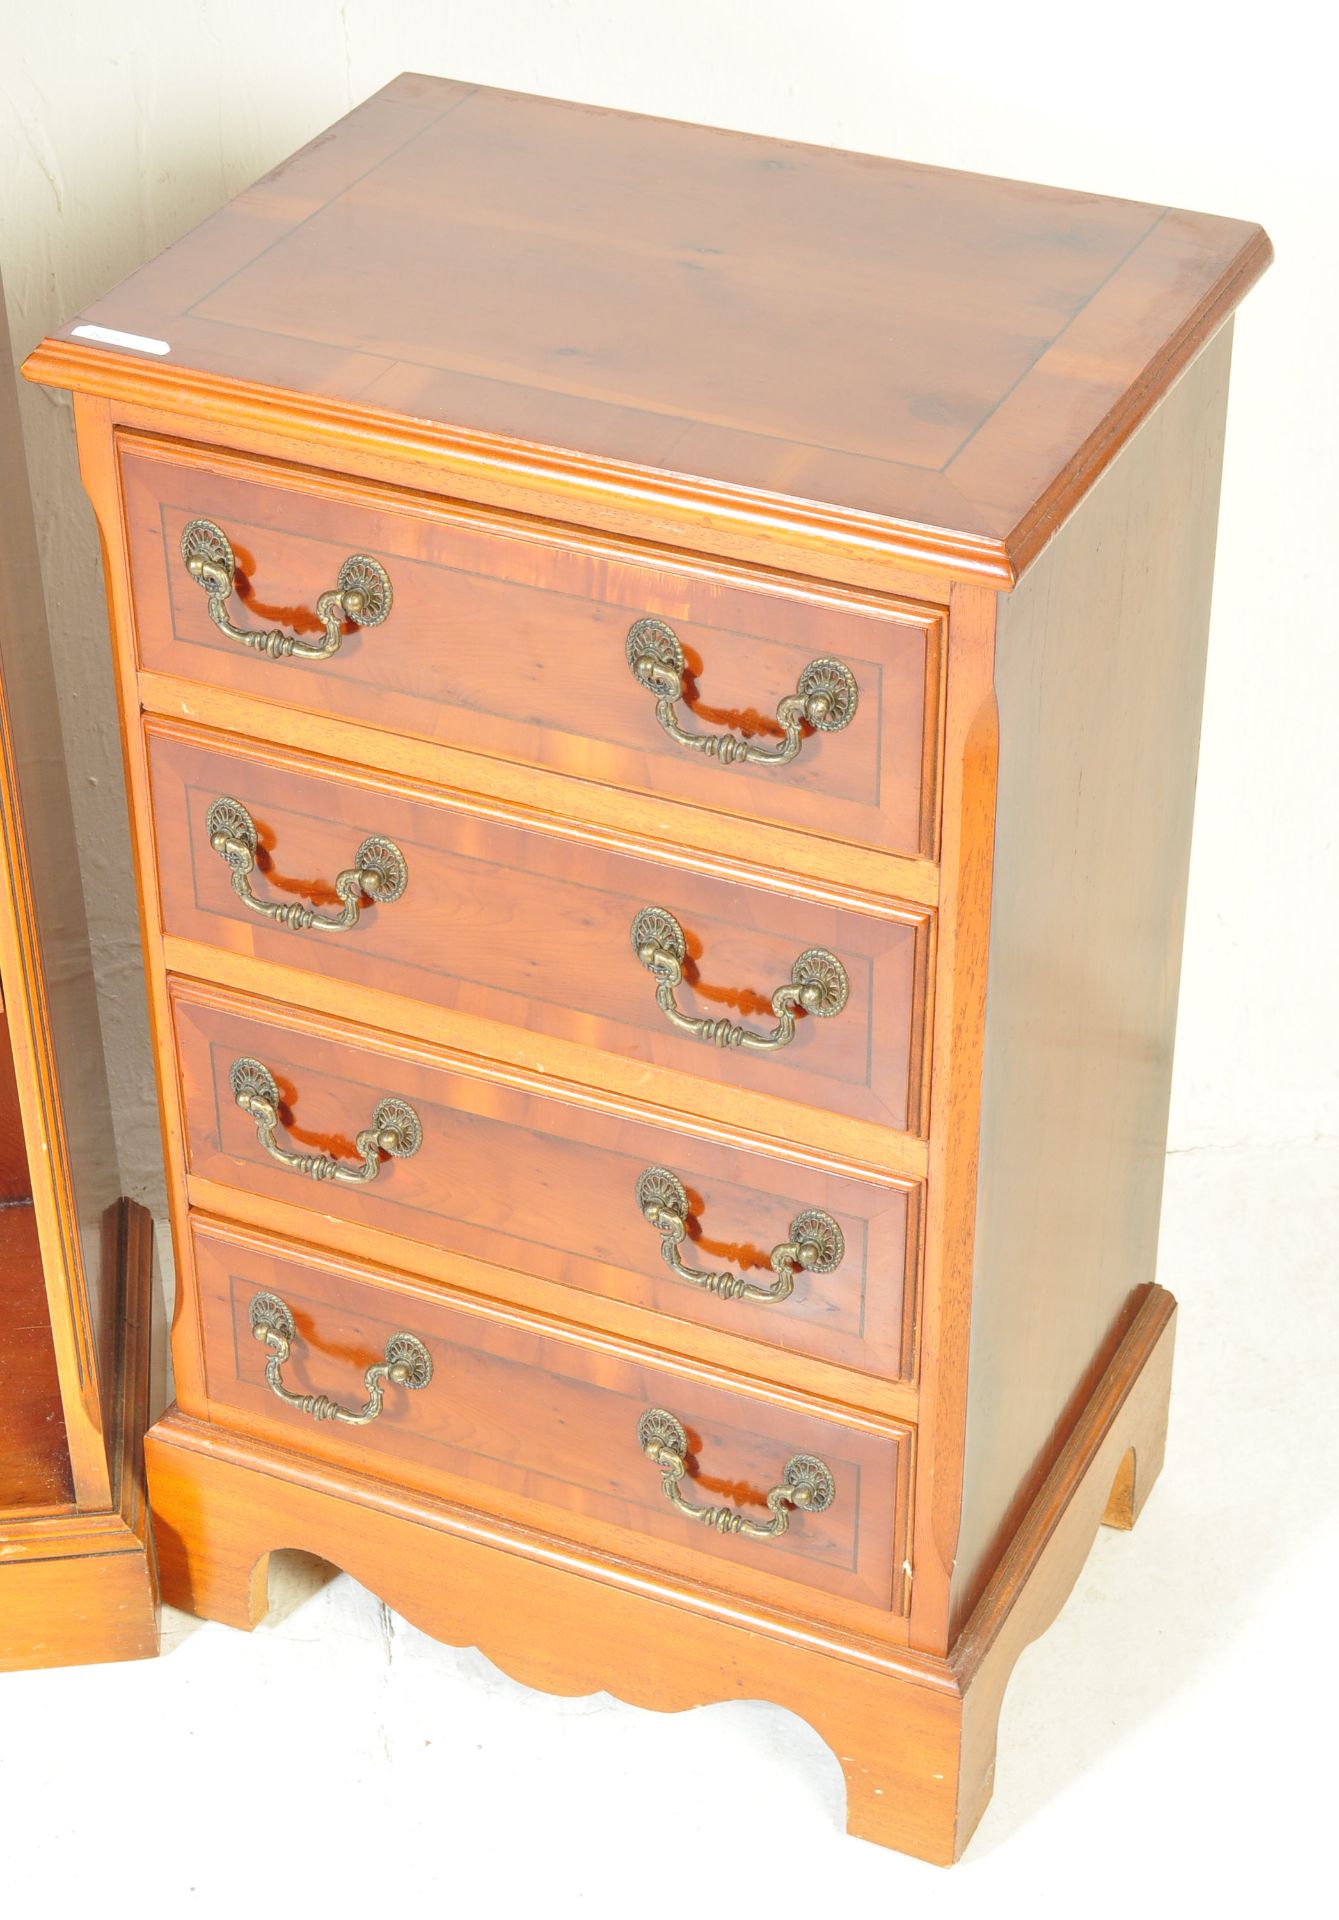 COLLECTION OF YEW WOOD REGENCY FURNITURE - Image 4 of 7